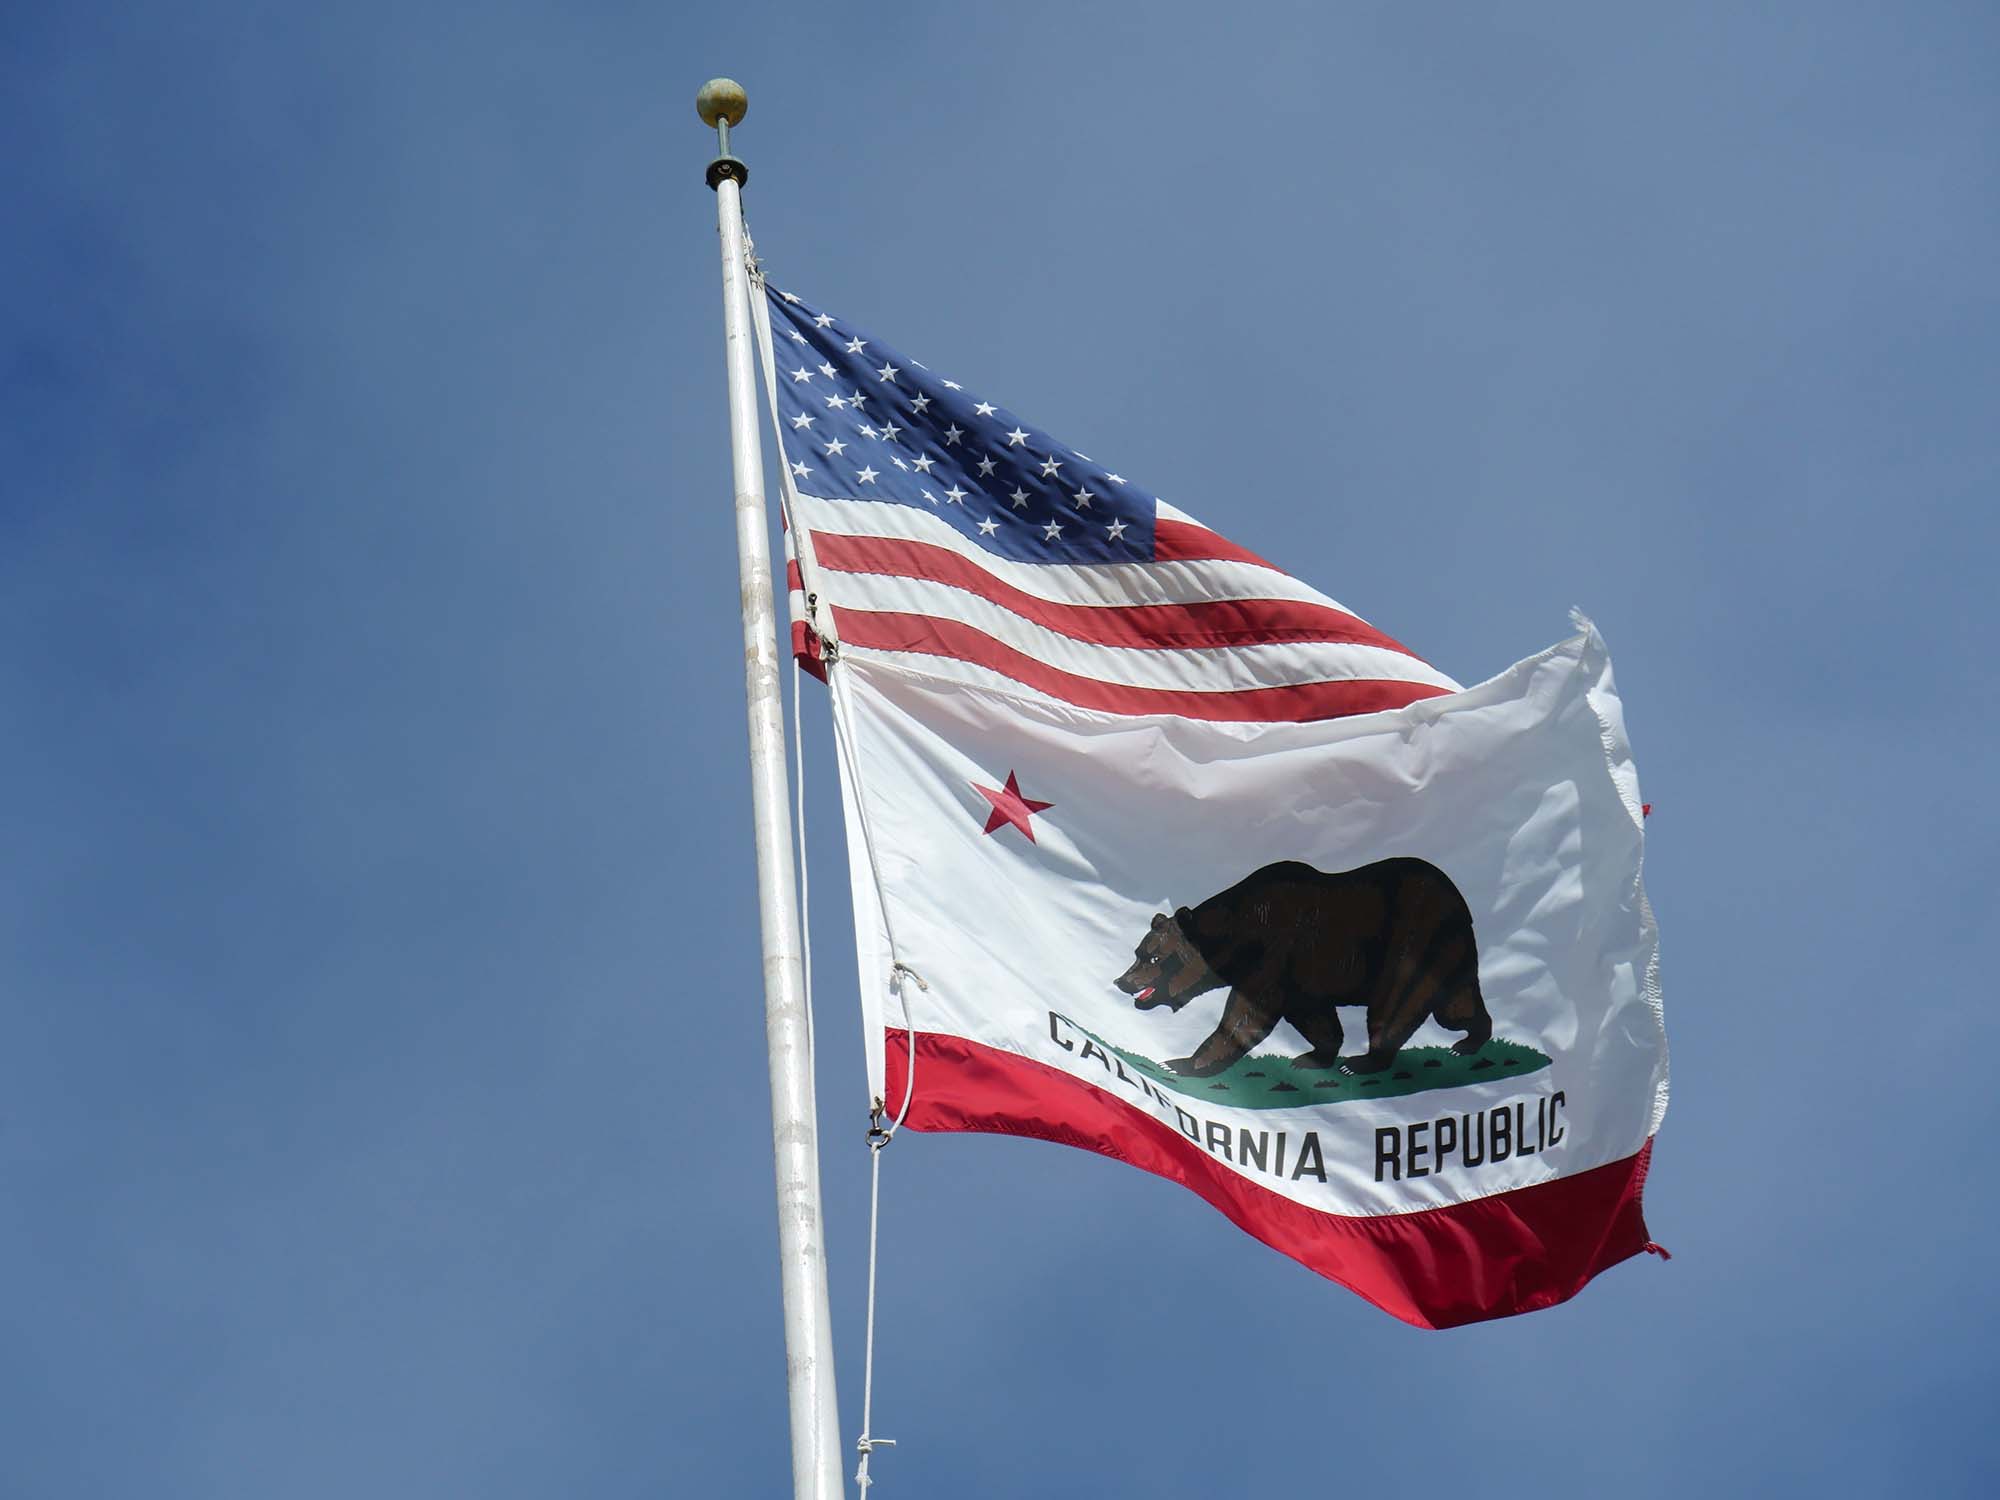 USA and California flags on a flagpole together with blue sky background